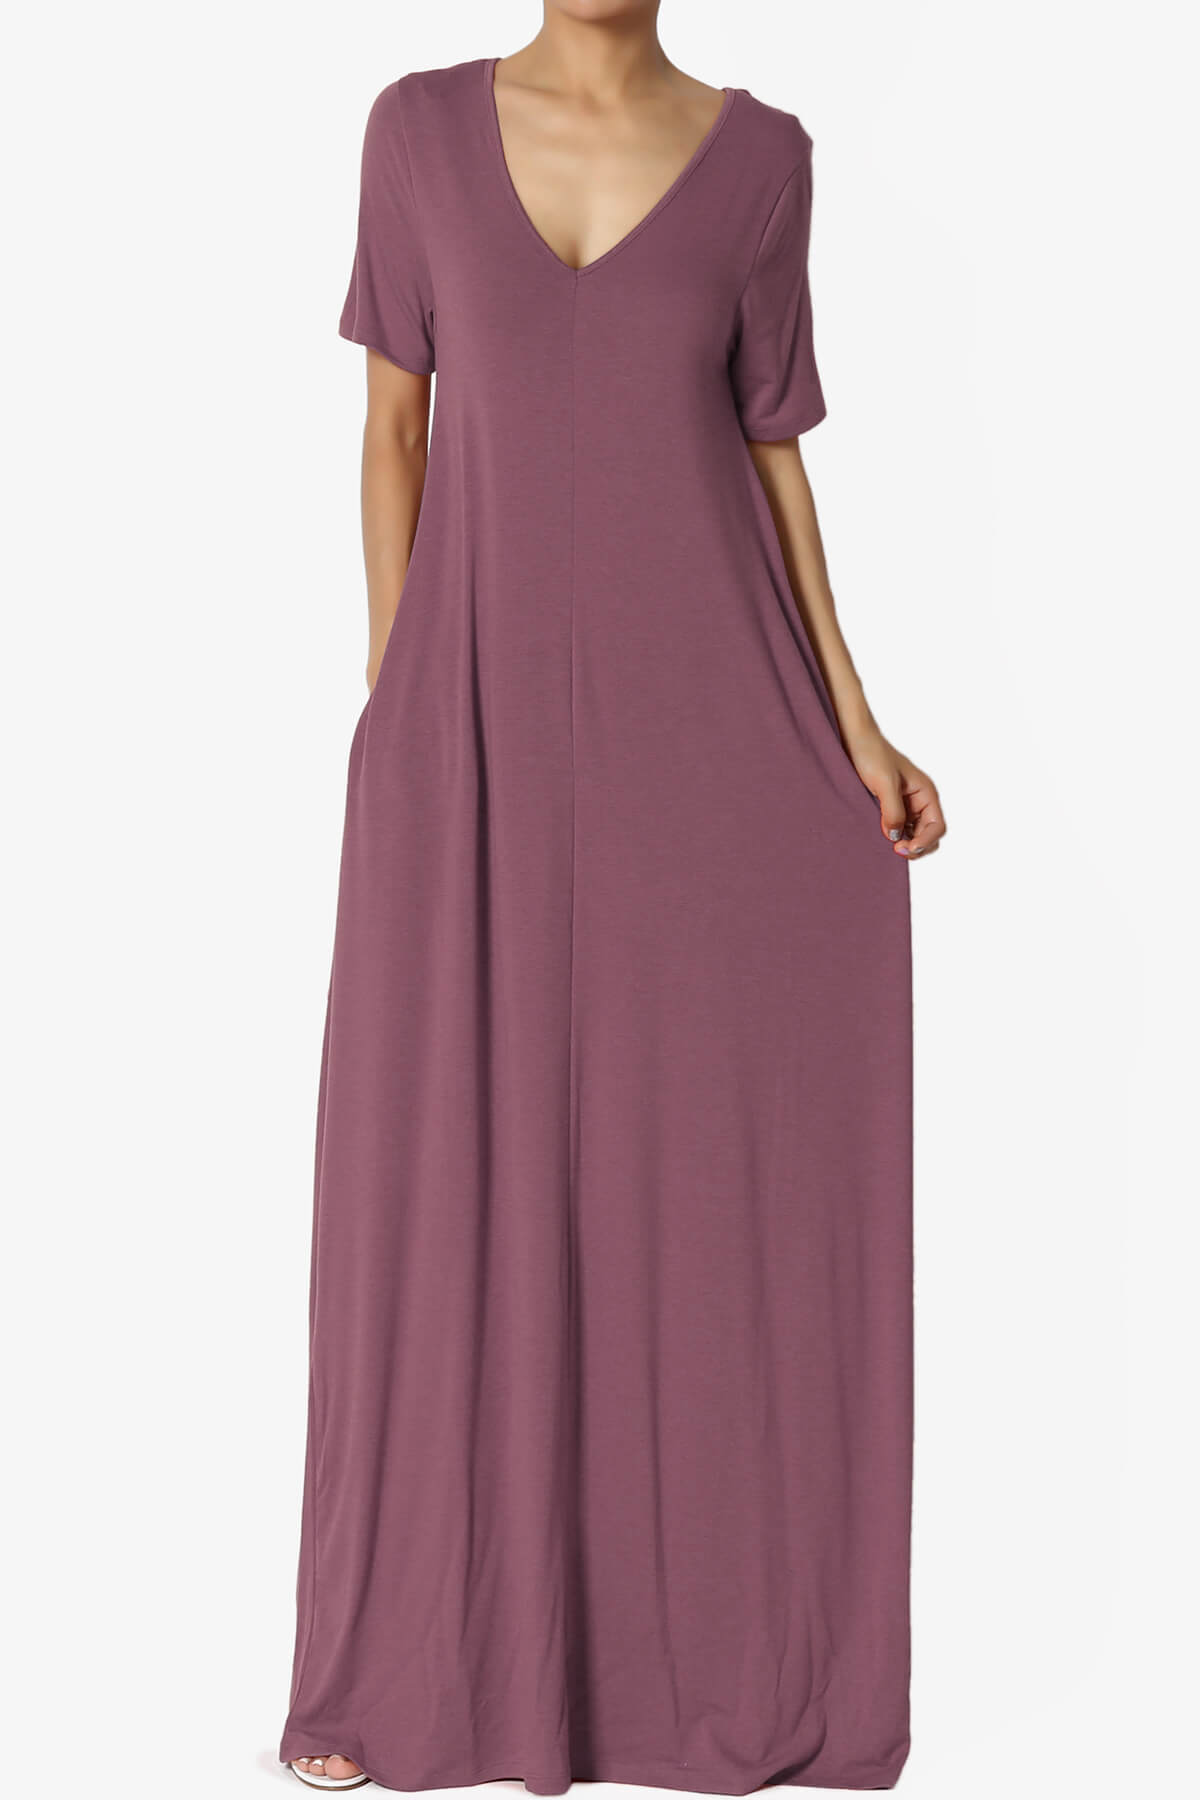 Load image into Gallery viewer, Vina Pocket Oversized Maxi Dress DUSTY PLUM_1
